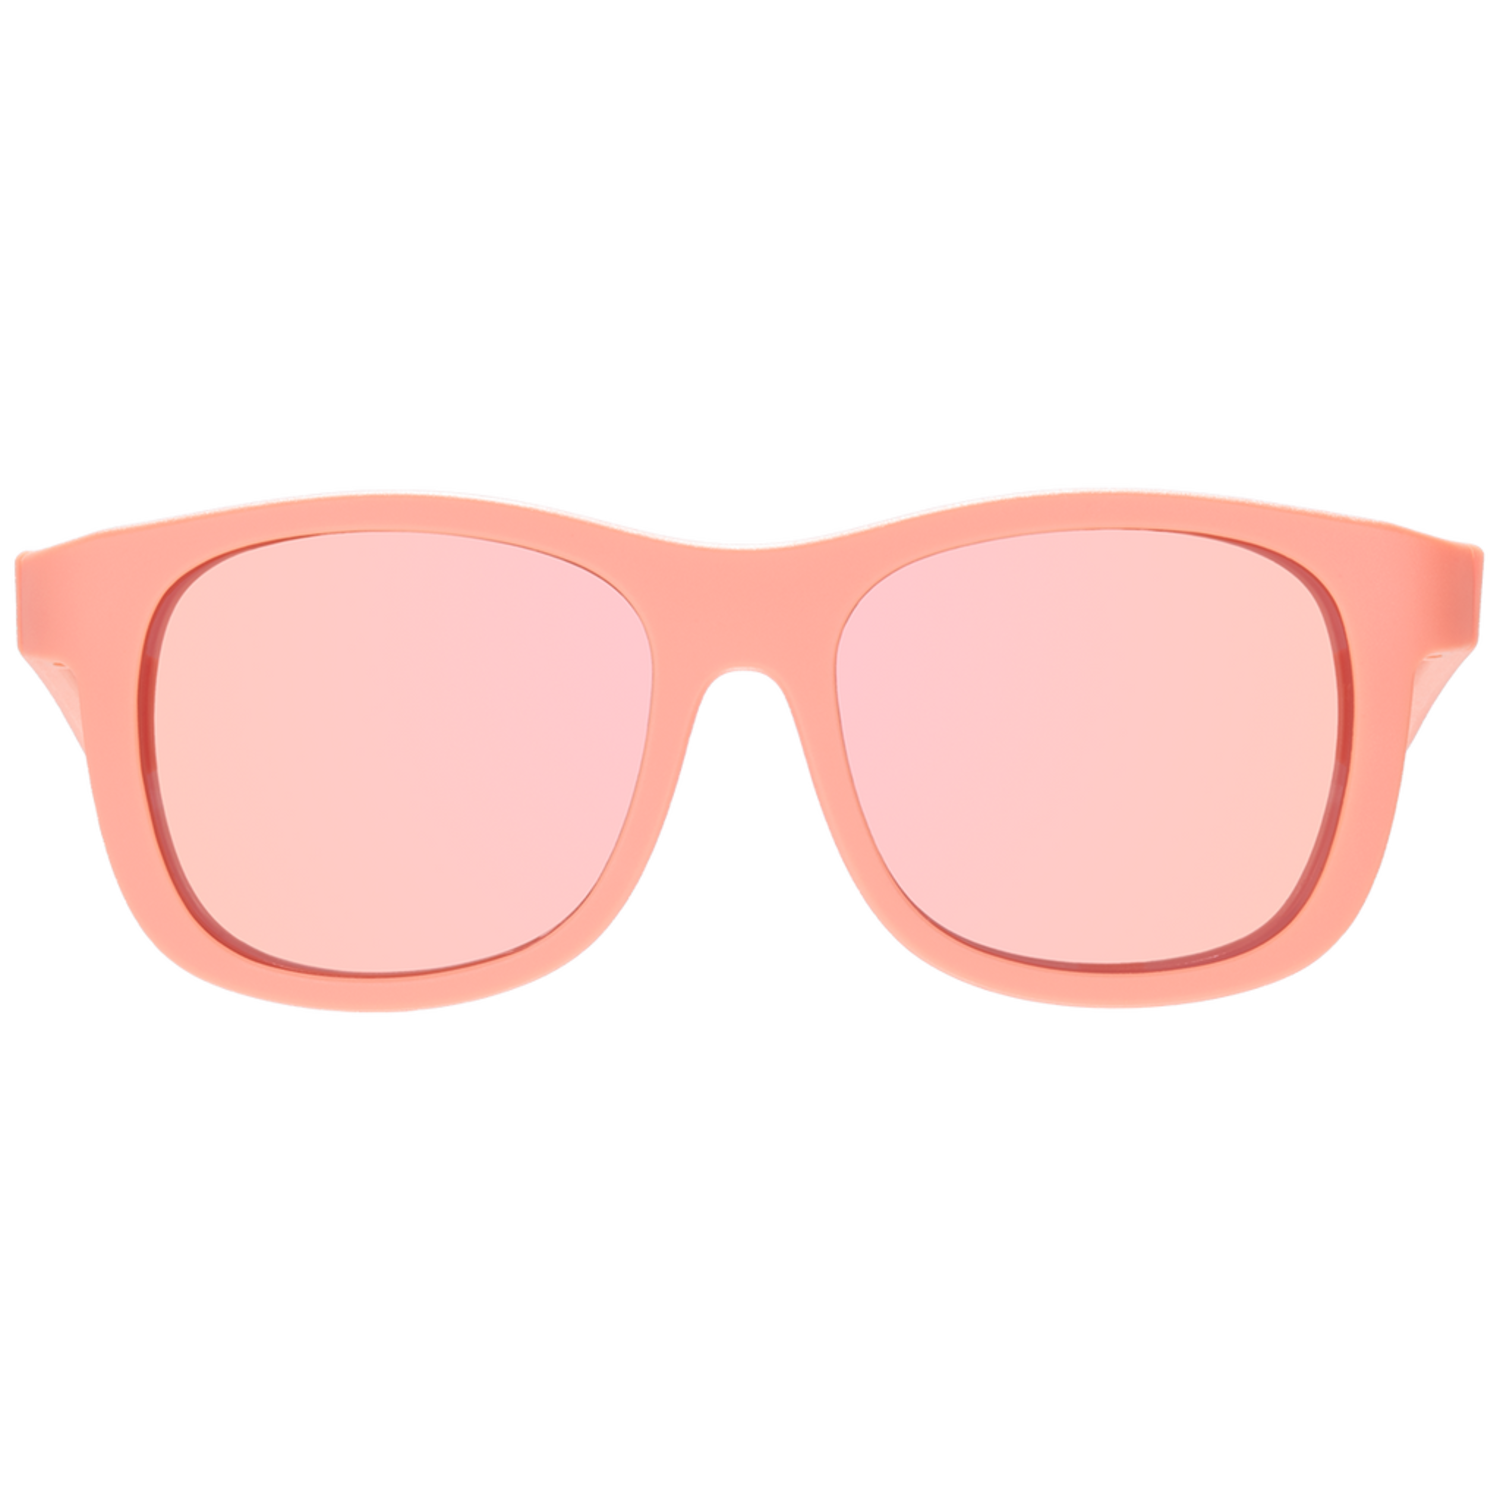 Hot Pink Sunglasses Polarized | Recycled Plastic | Waxhead Snapper Pink